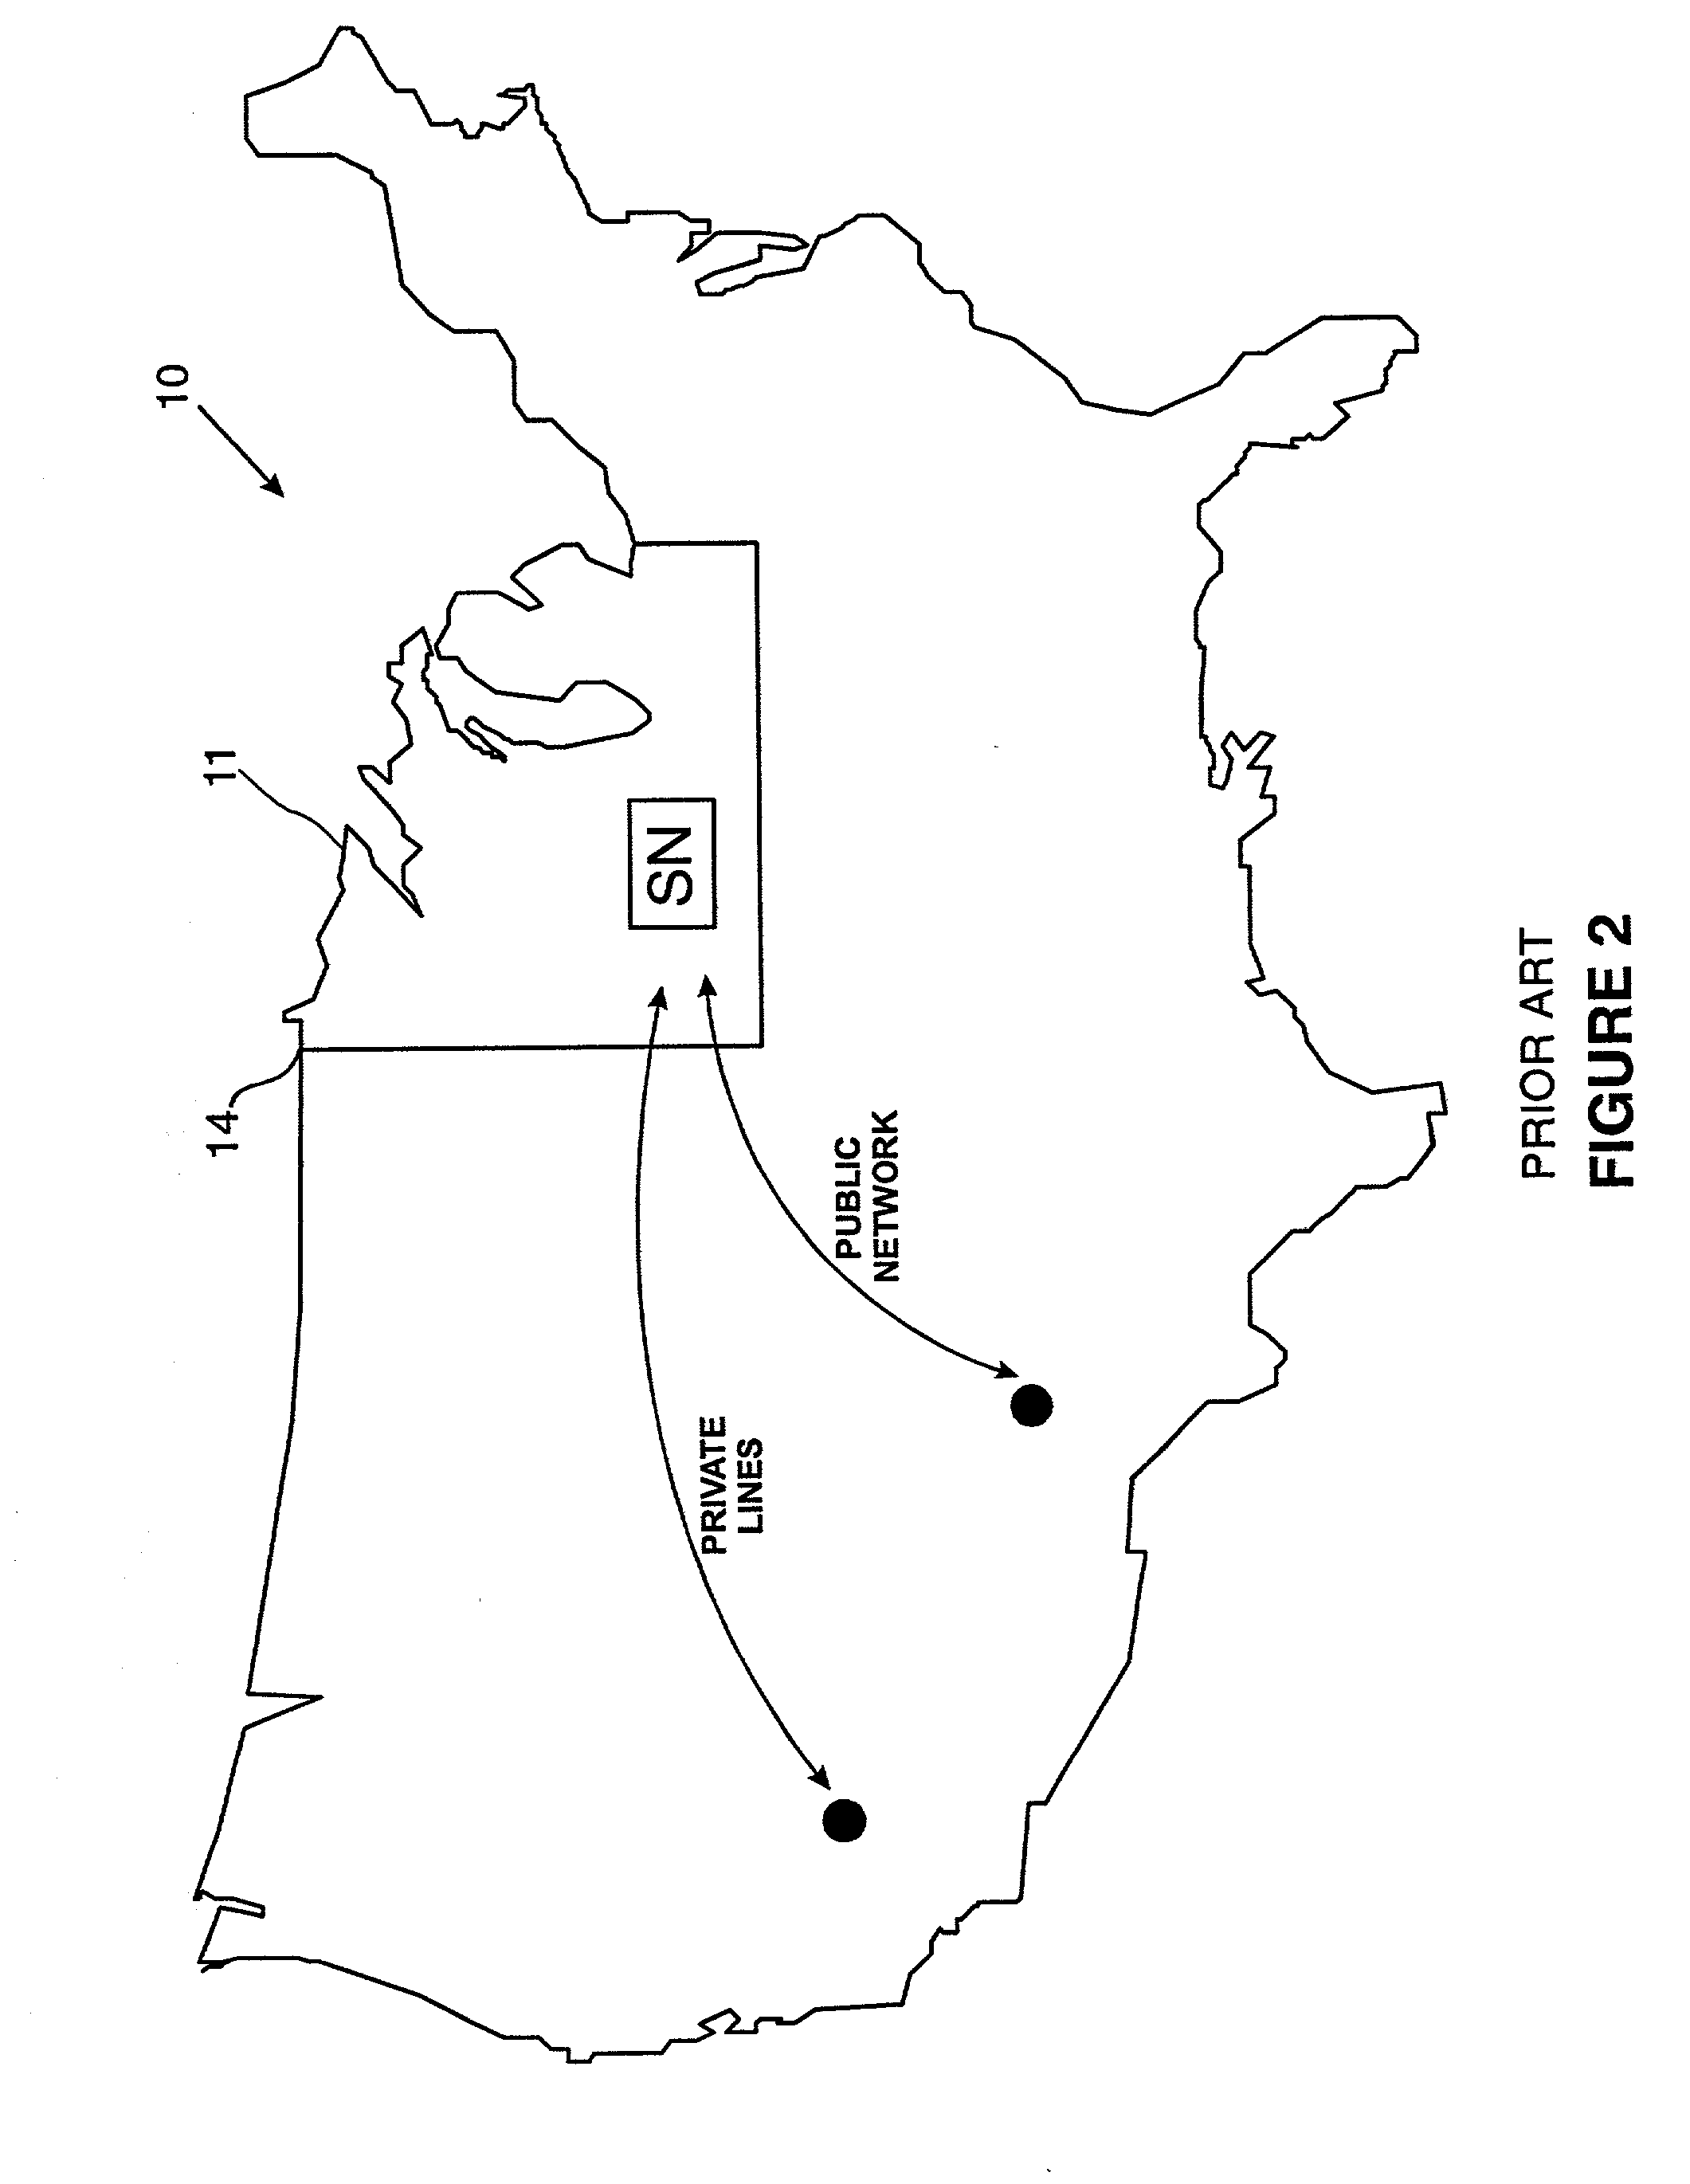 System and method for providing telephony services to remote subscribers